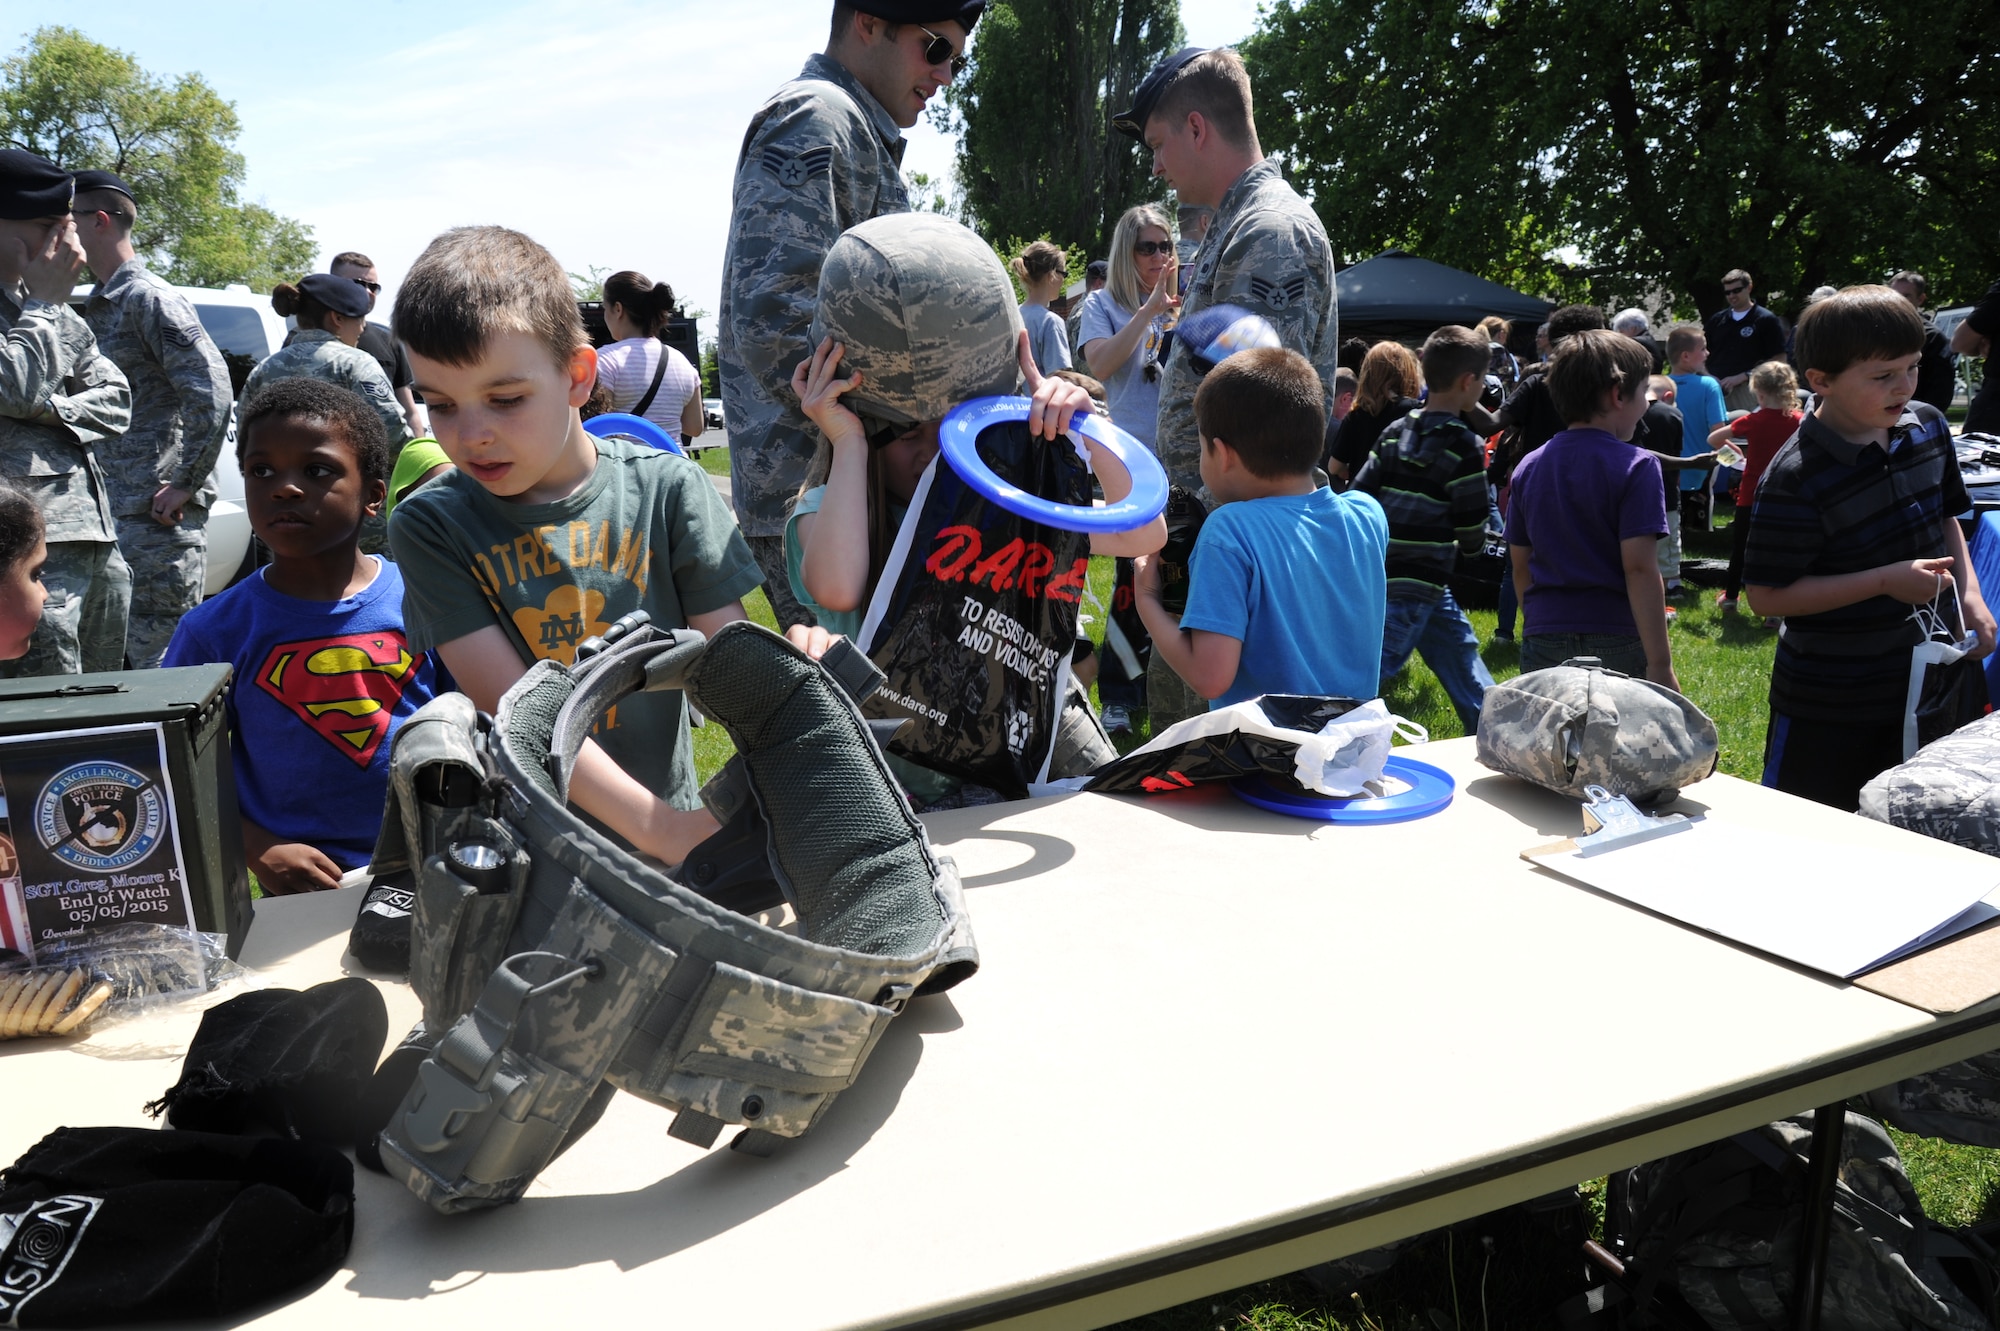 Children from Michael Anderson Elementary School try on security forces helmets and equipment belts May 11, 2015, at Fairchild Air Force Base, Wash. The children had the opportunity to speak with different law enforcement agencies such as 92nd Security Forces Squadron personnel, local police department officials, representatives from D.A.R.E., Alcohol Tobacco and Firearms members, and SWAT personnel. (U.S. Air Force photo/Airman 1st Class Nicolo J. Daniello)